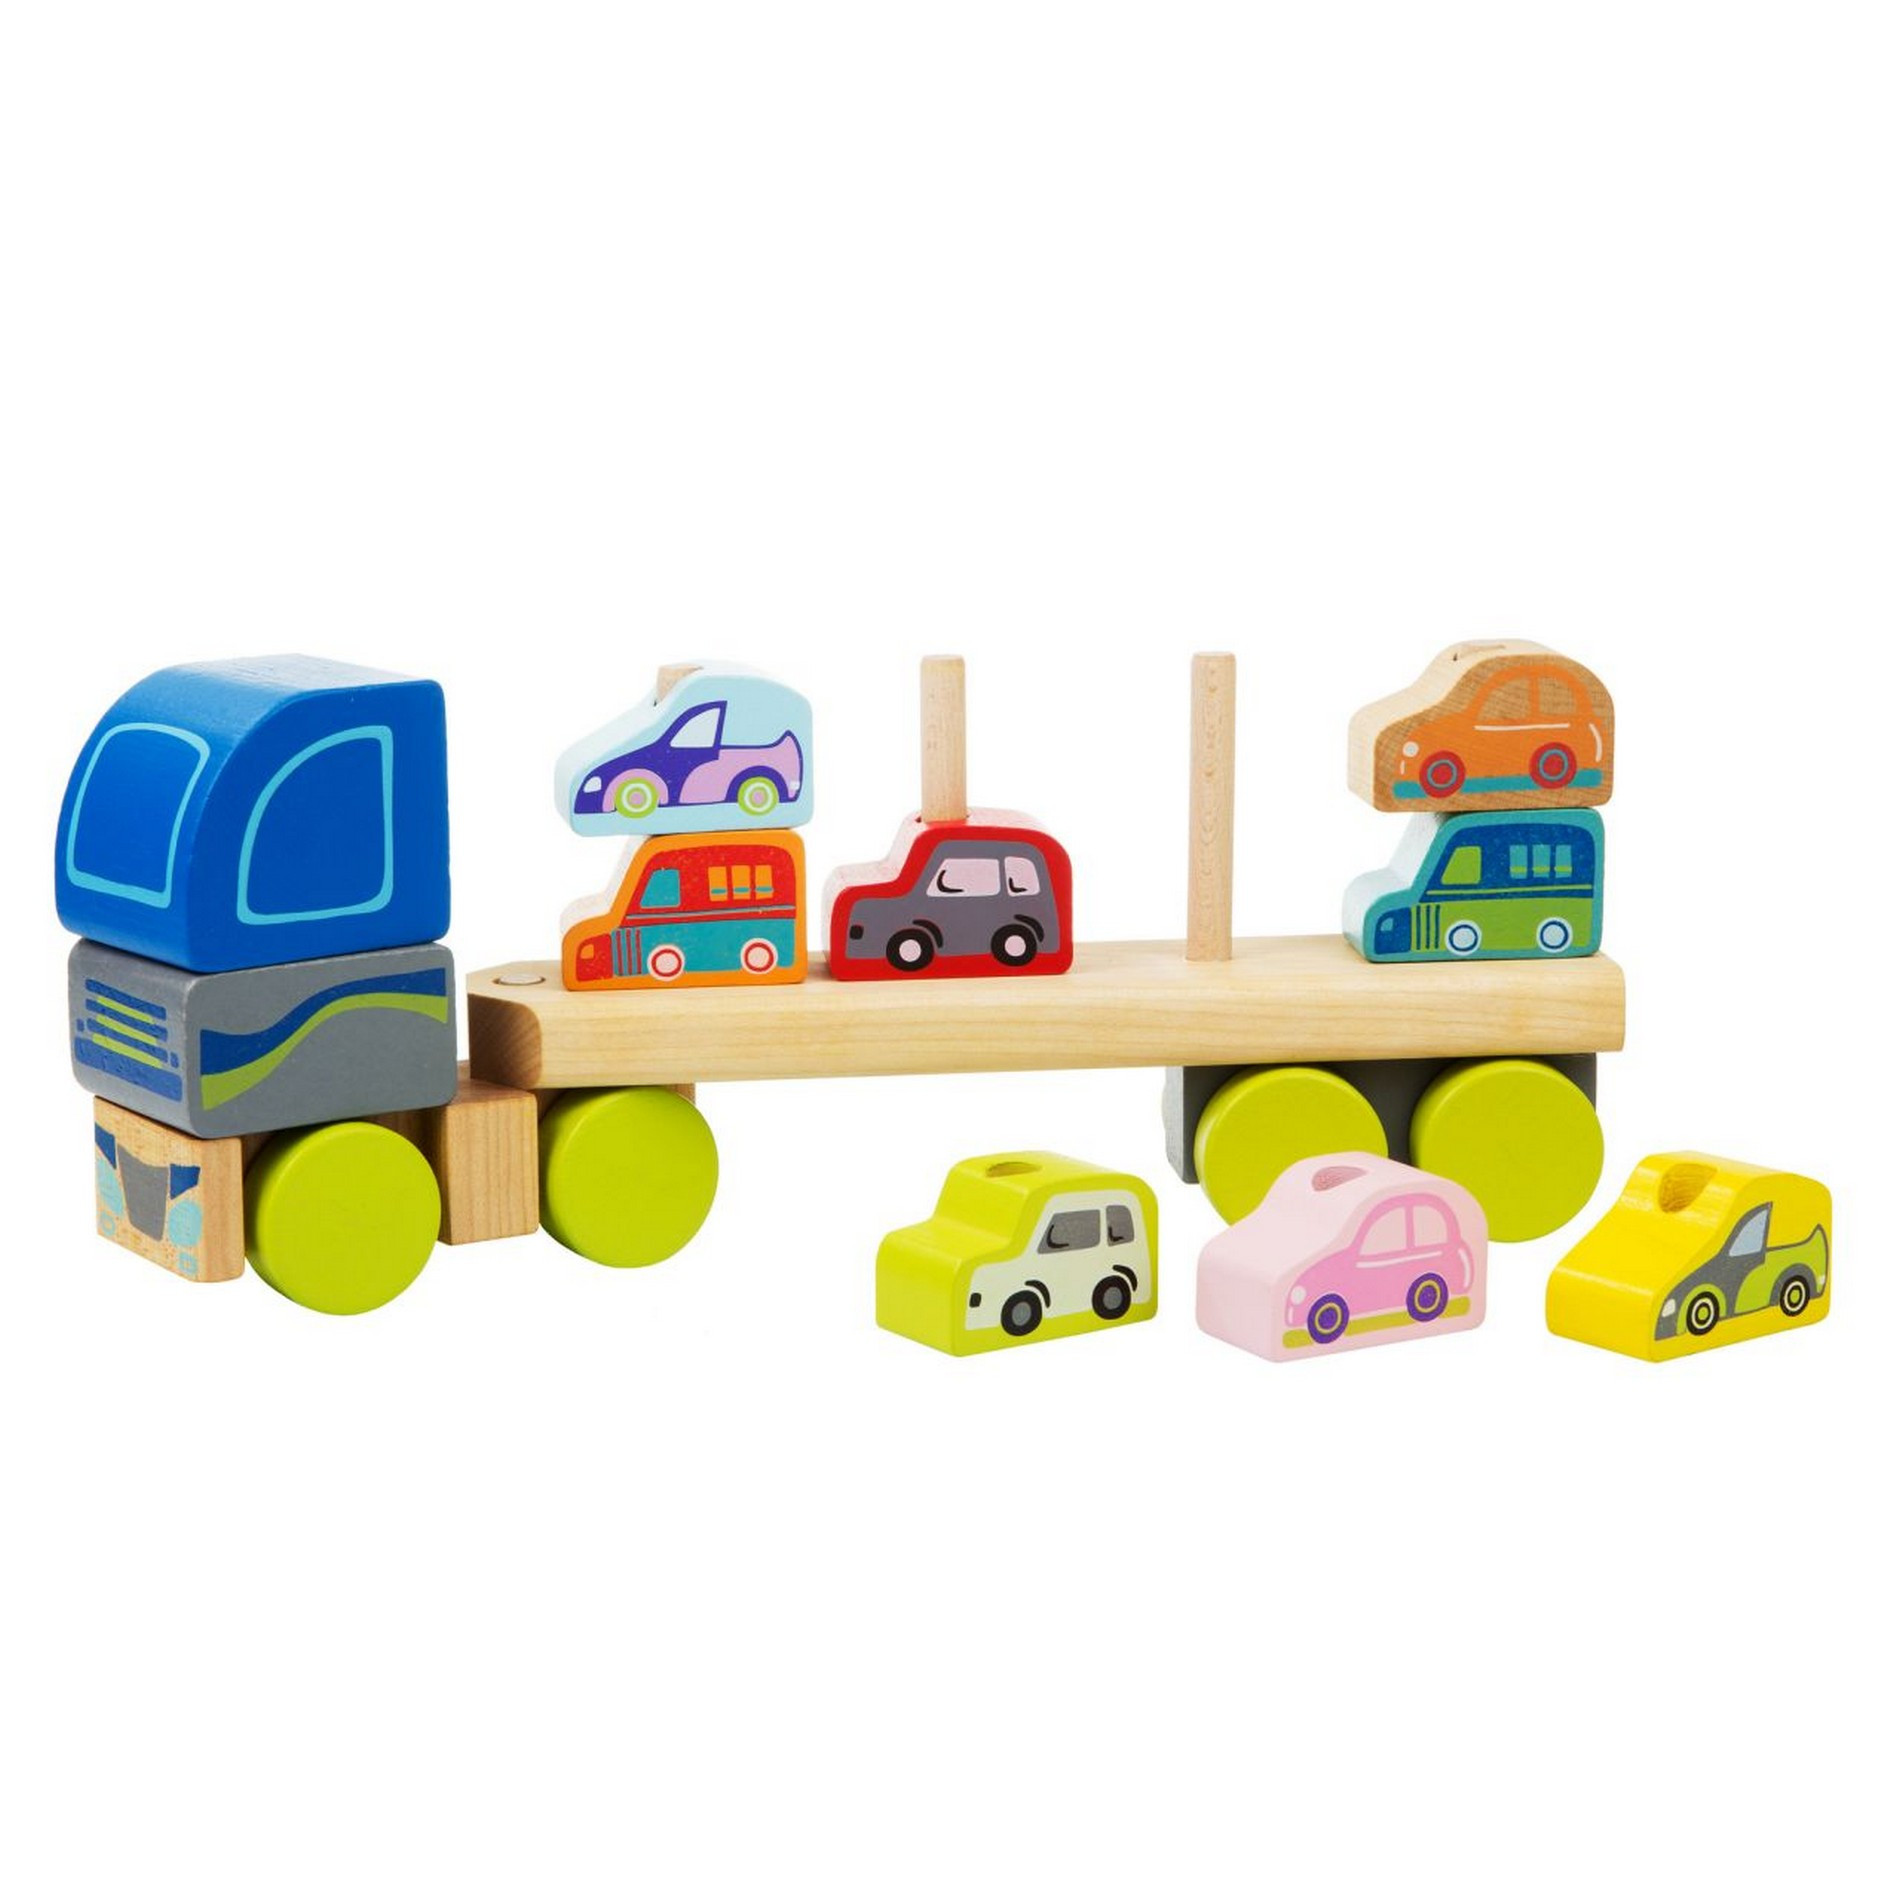 Truck with cars - demaged packing